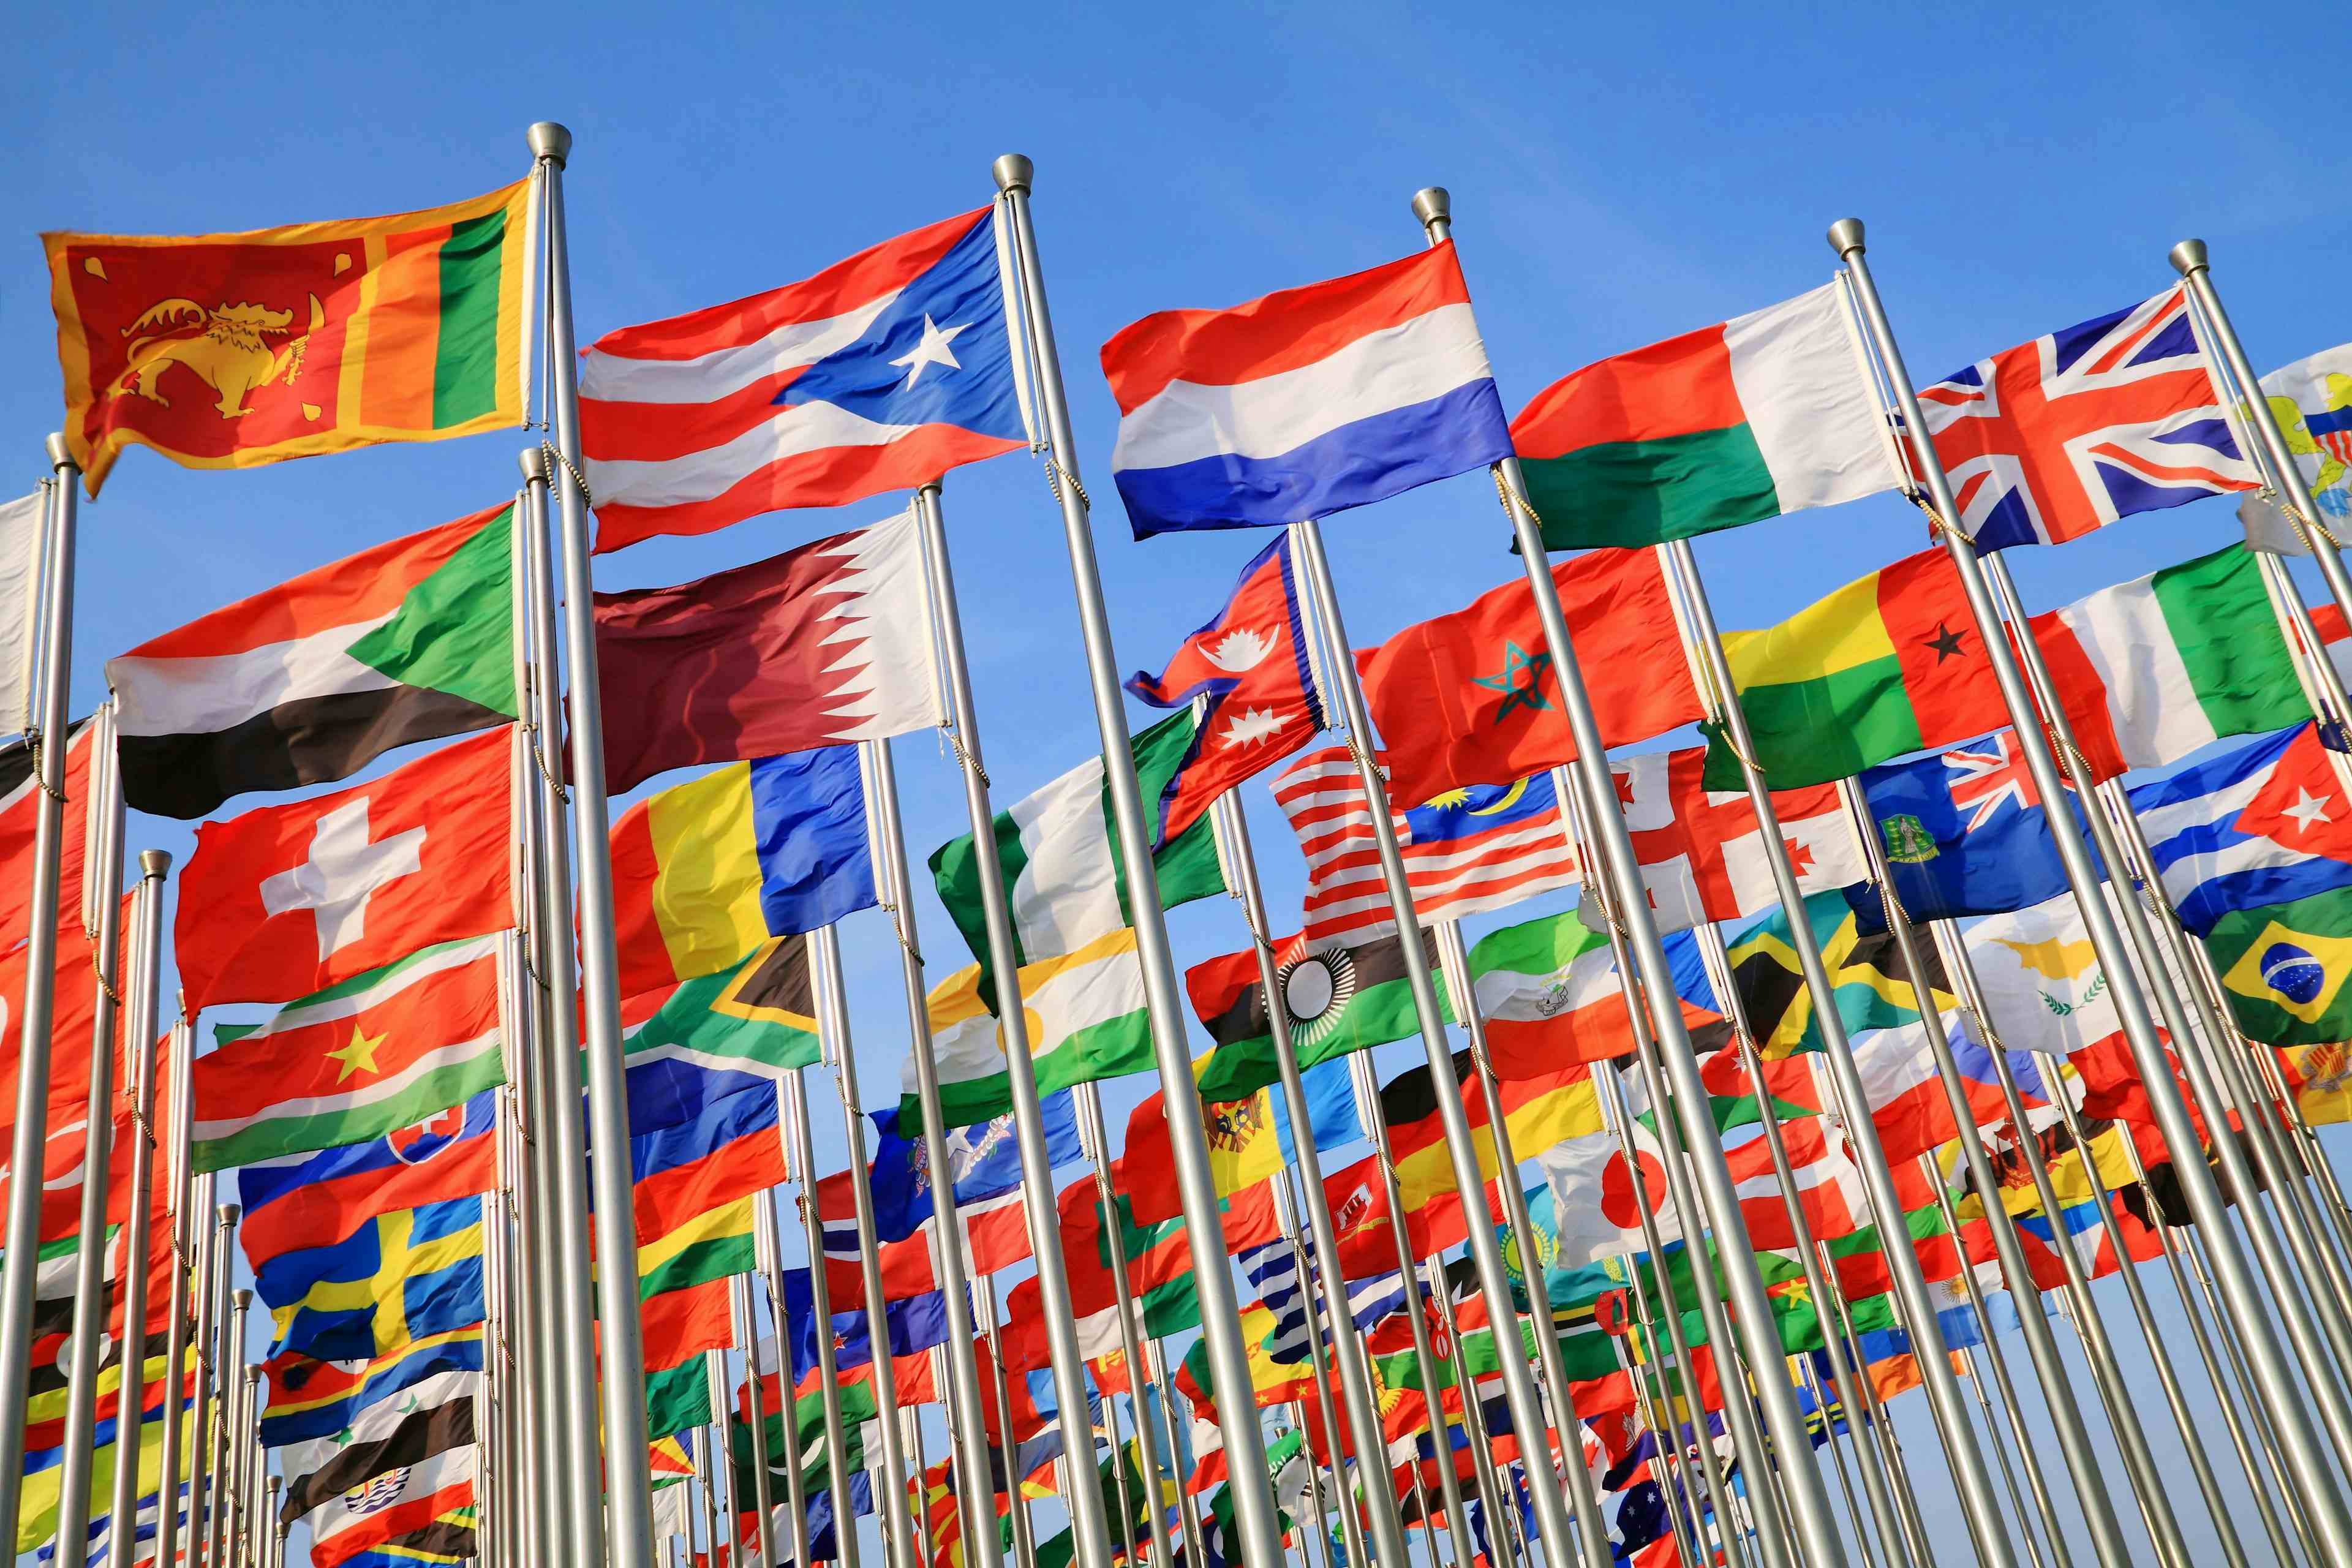 Flags of various countries waving in the wind